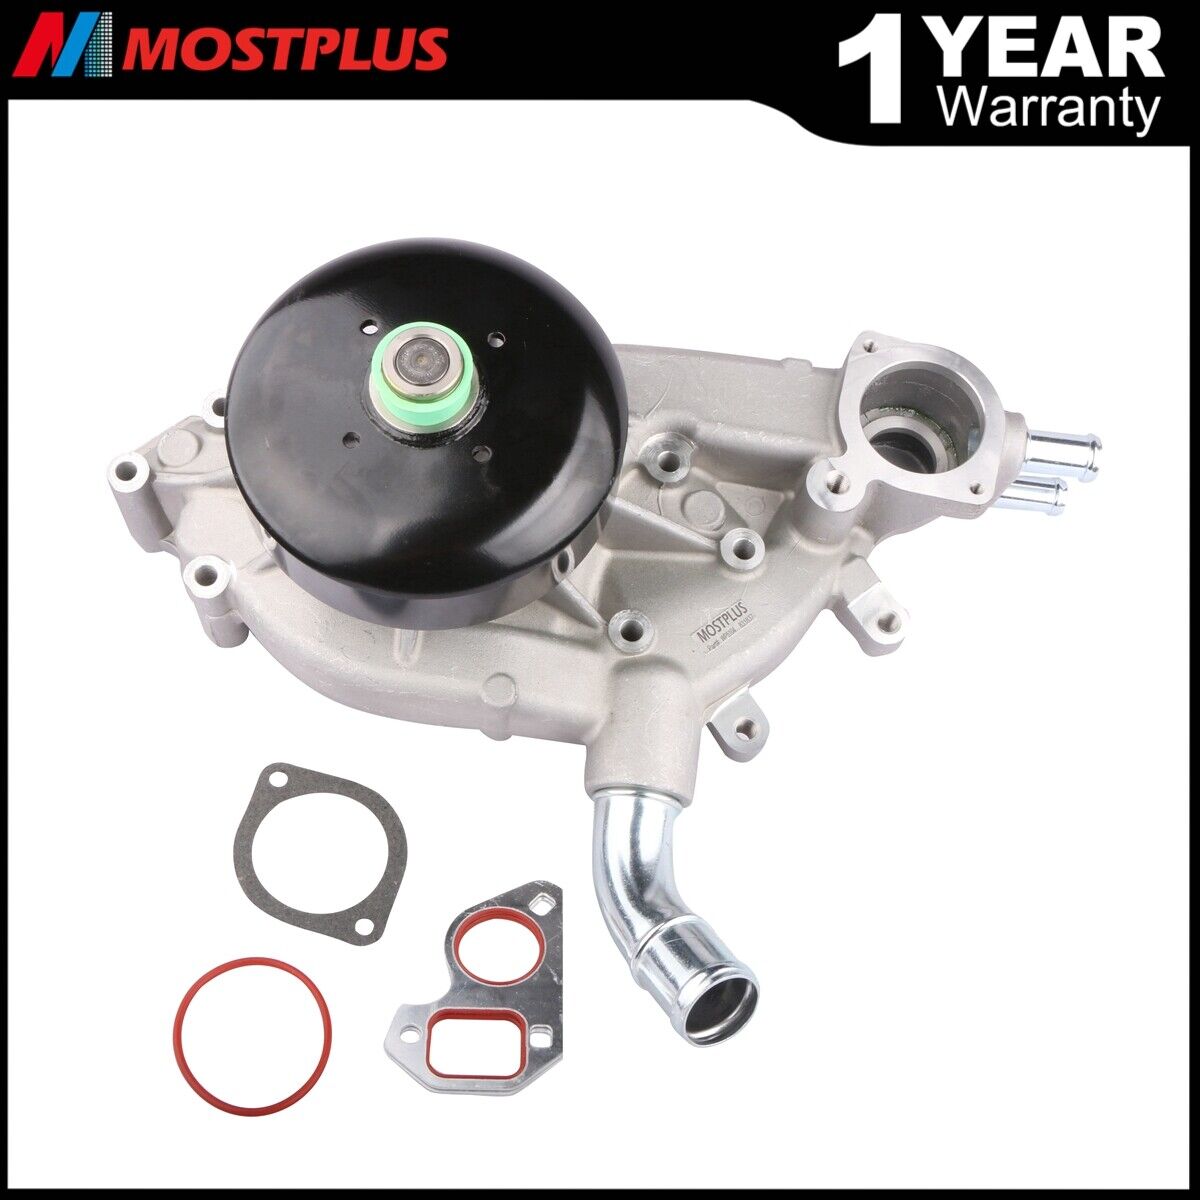 Water Pump w/ Gasket For Buick Chevy Tahoe GMC Yukon Cadillac 4.8L 5.3L 6.0L